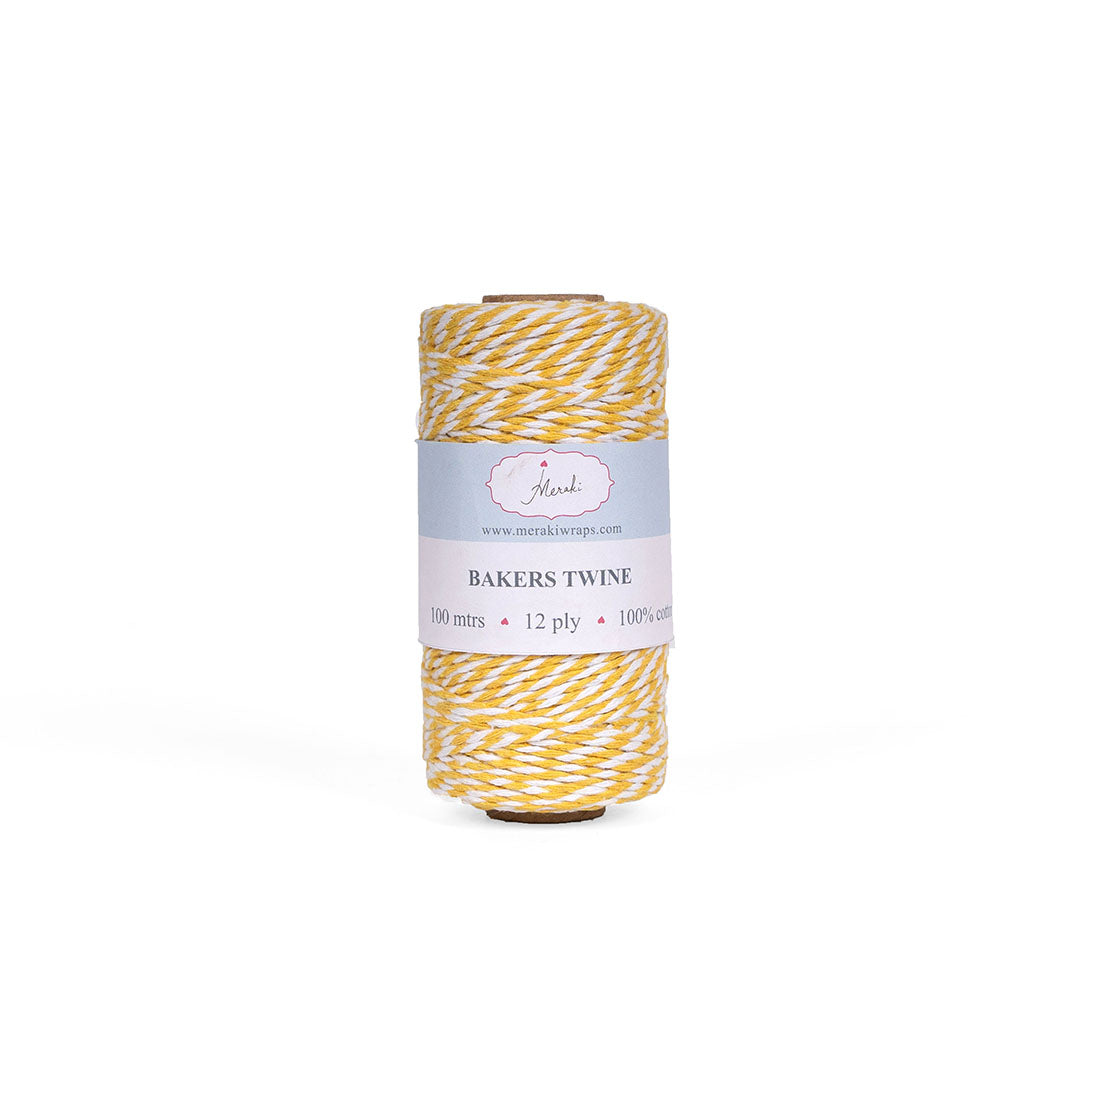 Bakers Twine- Mustard and White